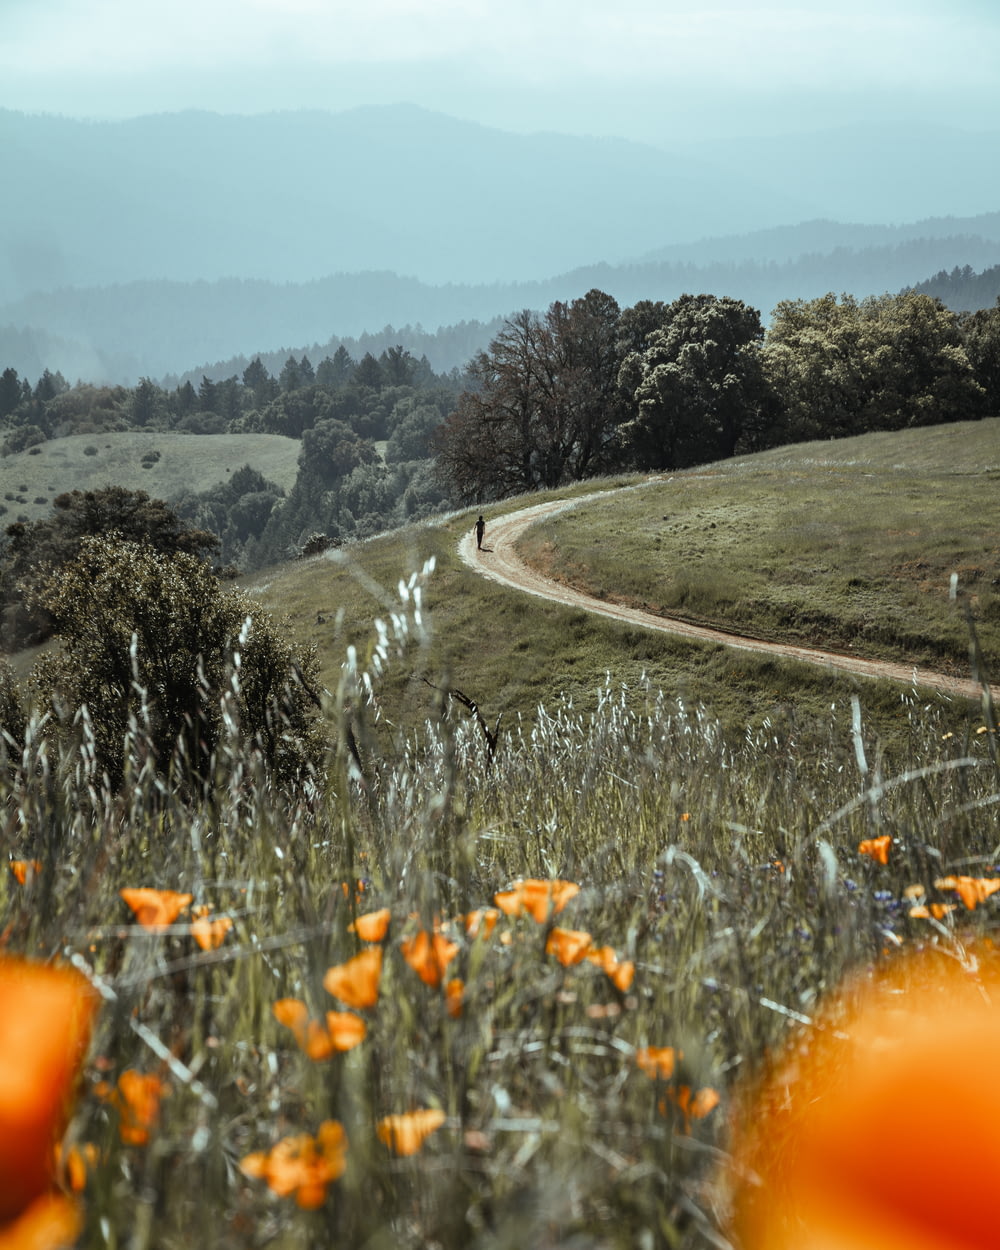 a dirt road going through a field with orange flowers